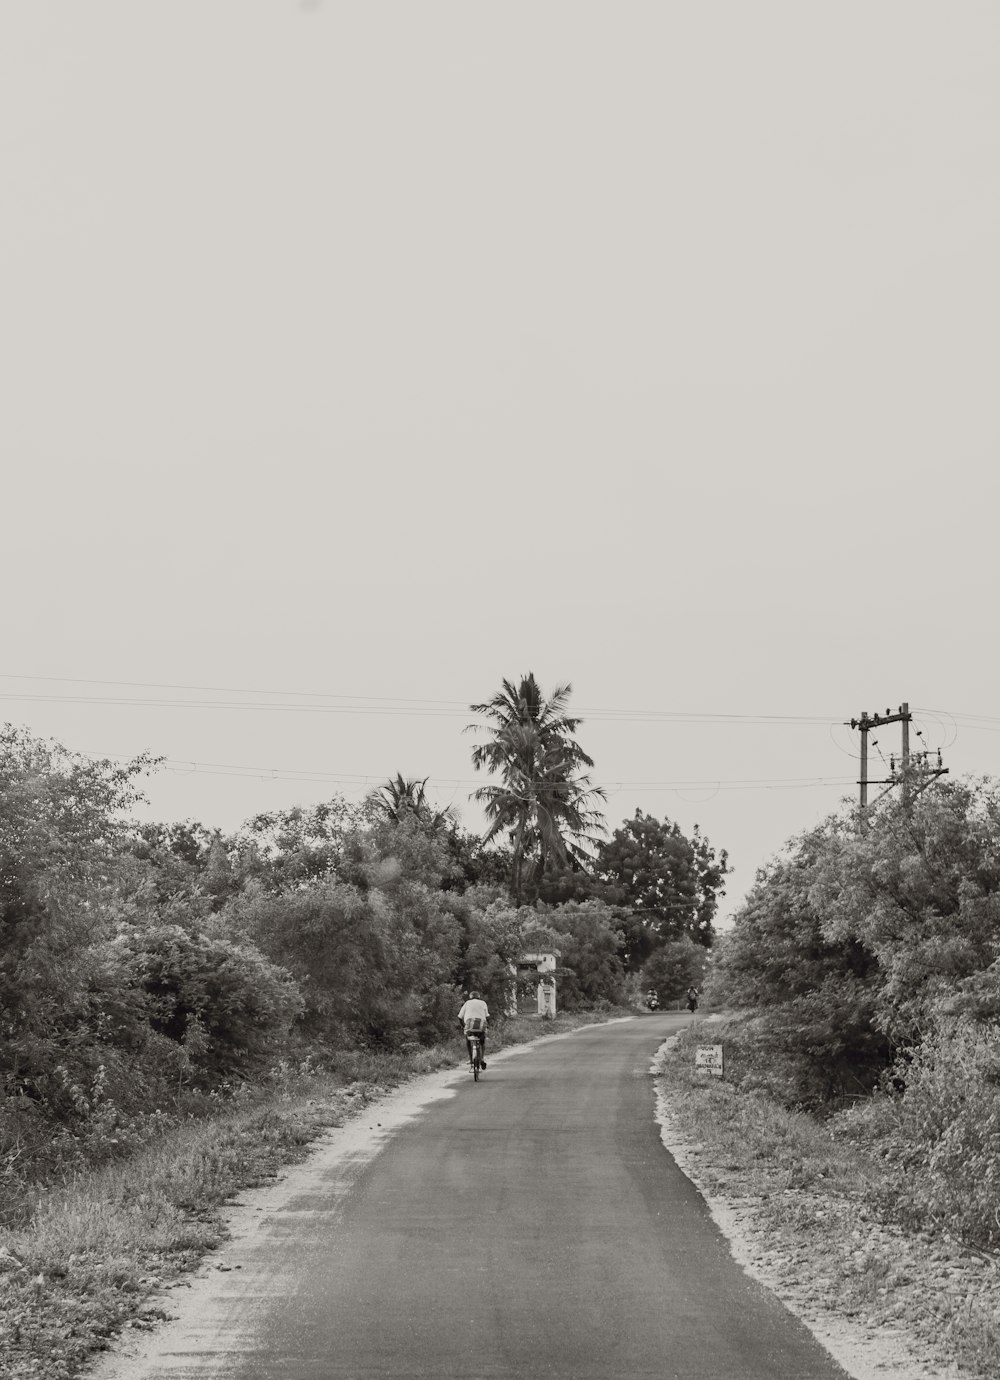 a black and white photo of a person riding a bike down a road